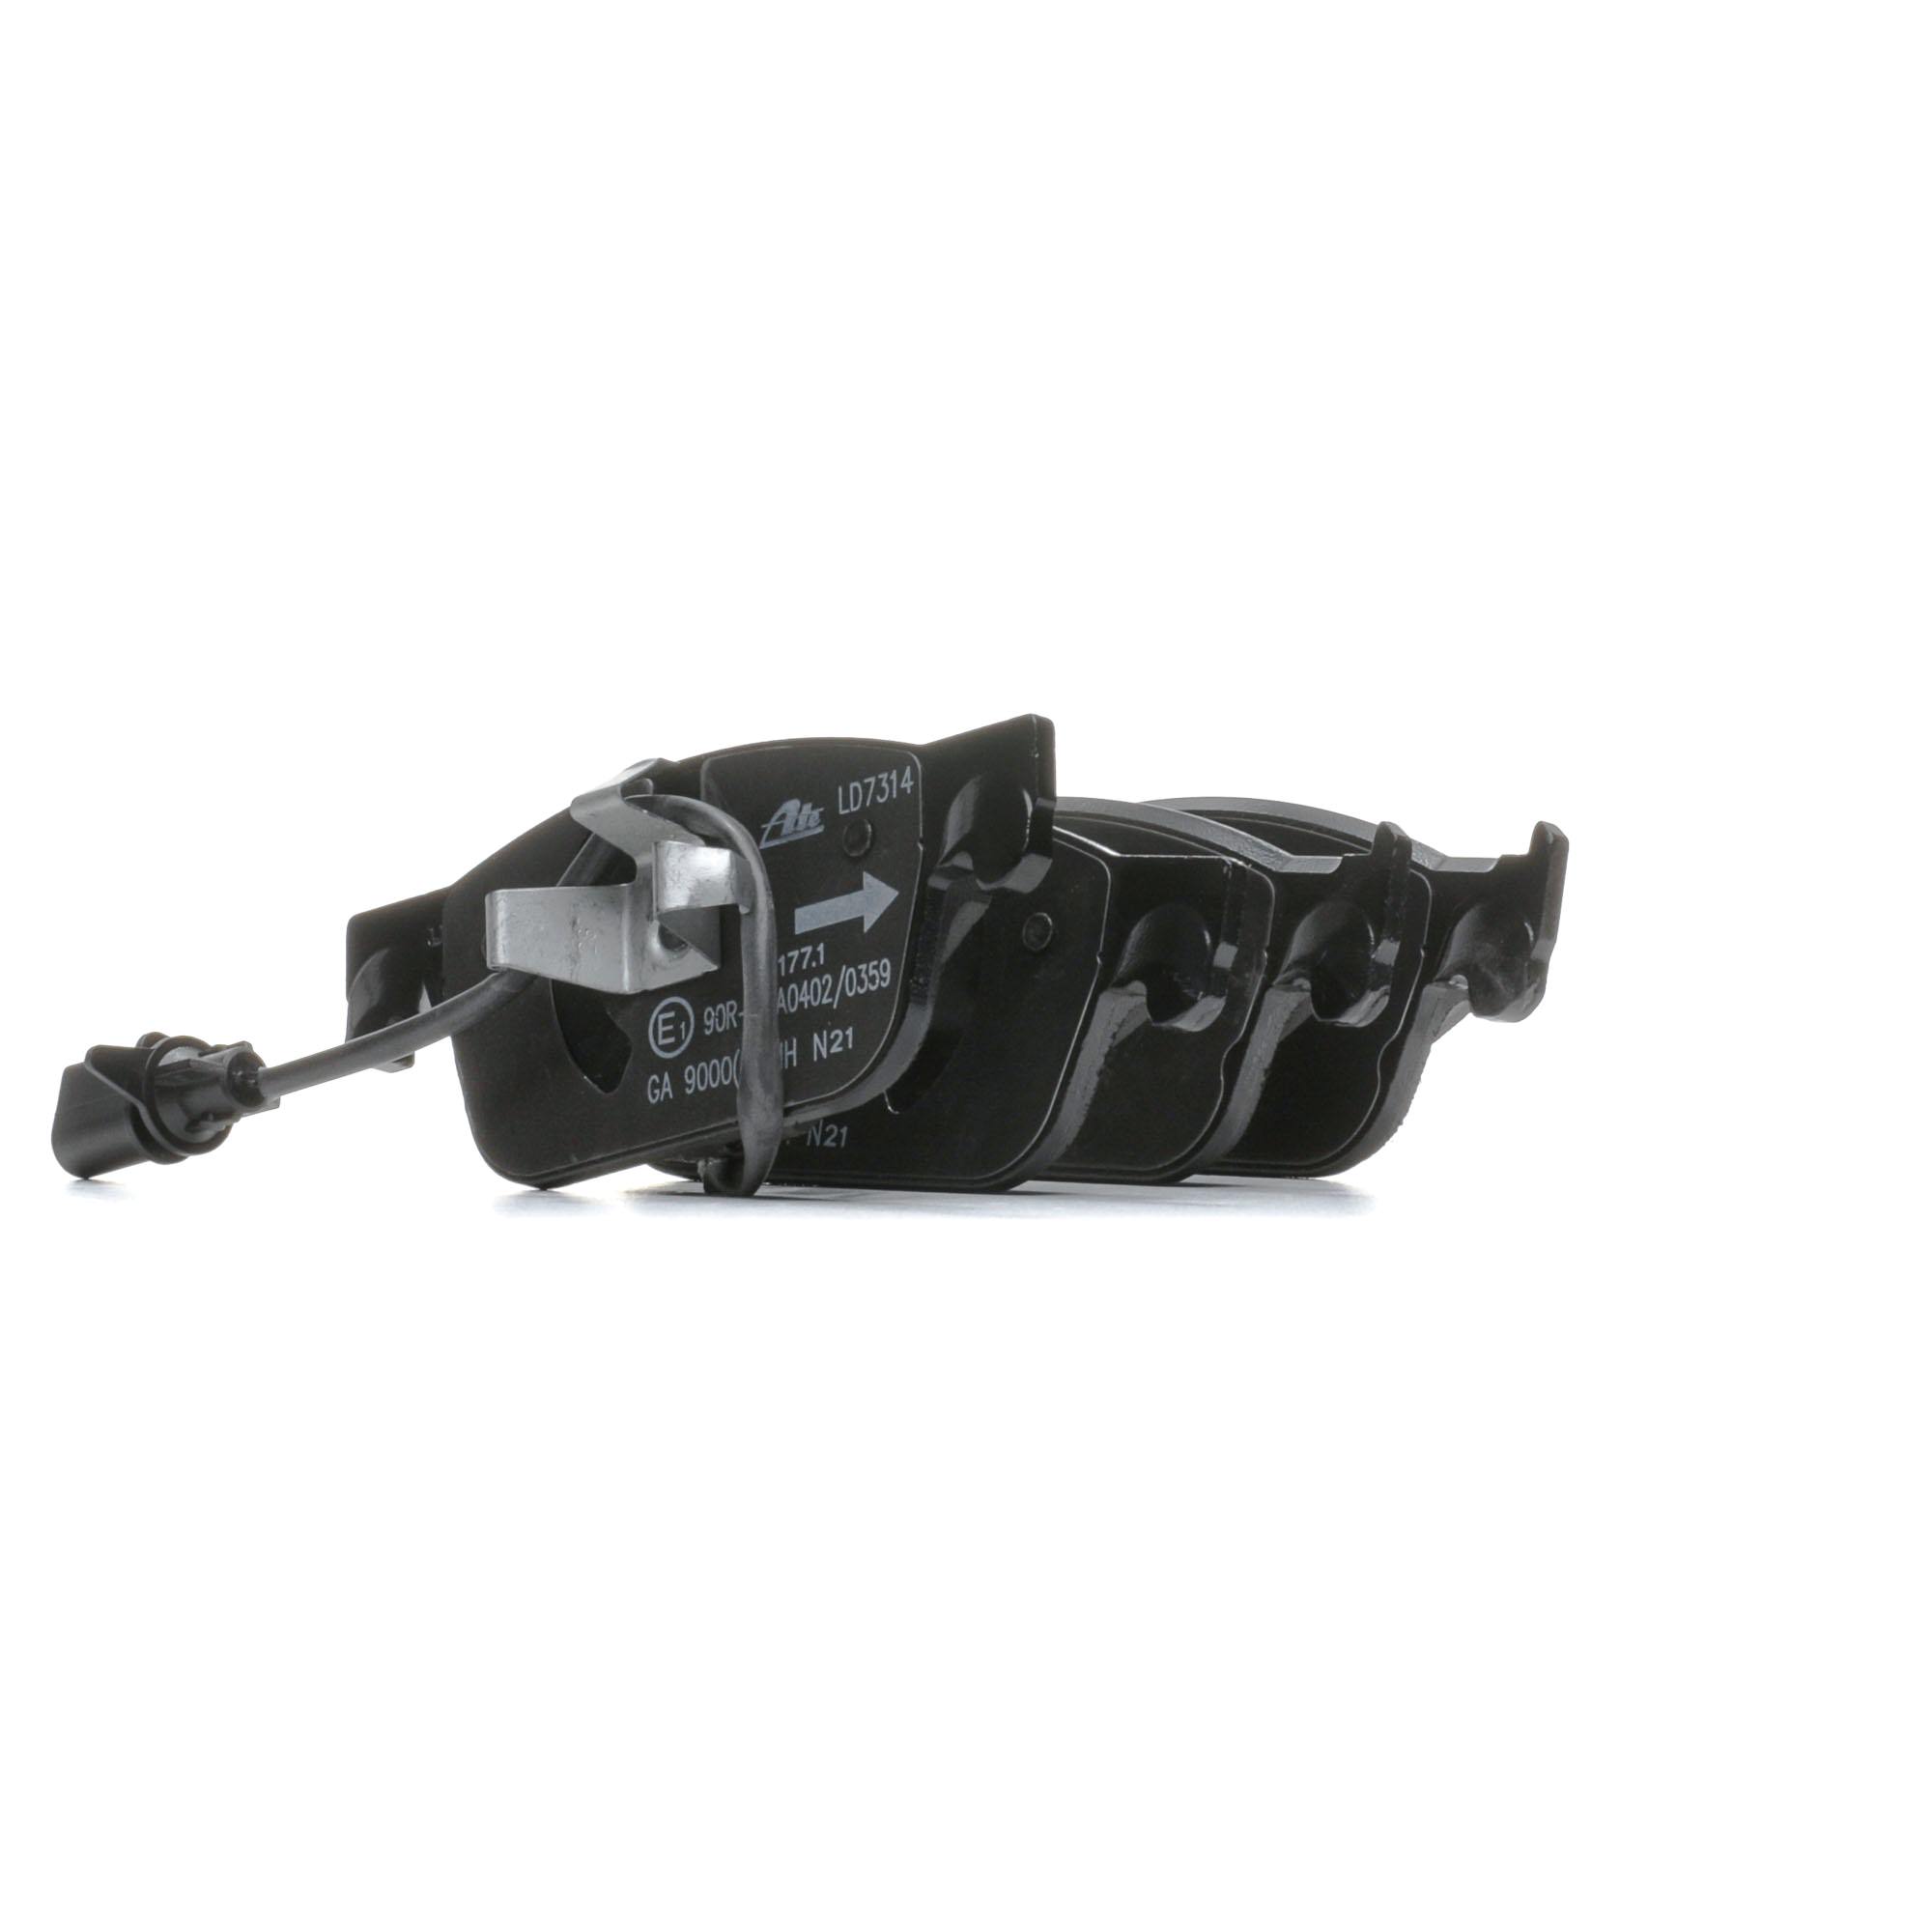 LD7314 ATE with integrated wear warning contact Height: 64,0mm, Width: 155,1mm, Thickness: 17,3mm Brake pads 13.0470-7314.2 buy